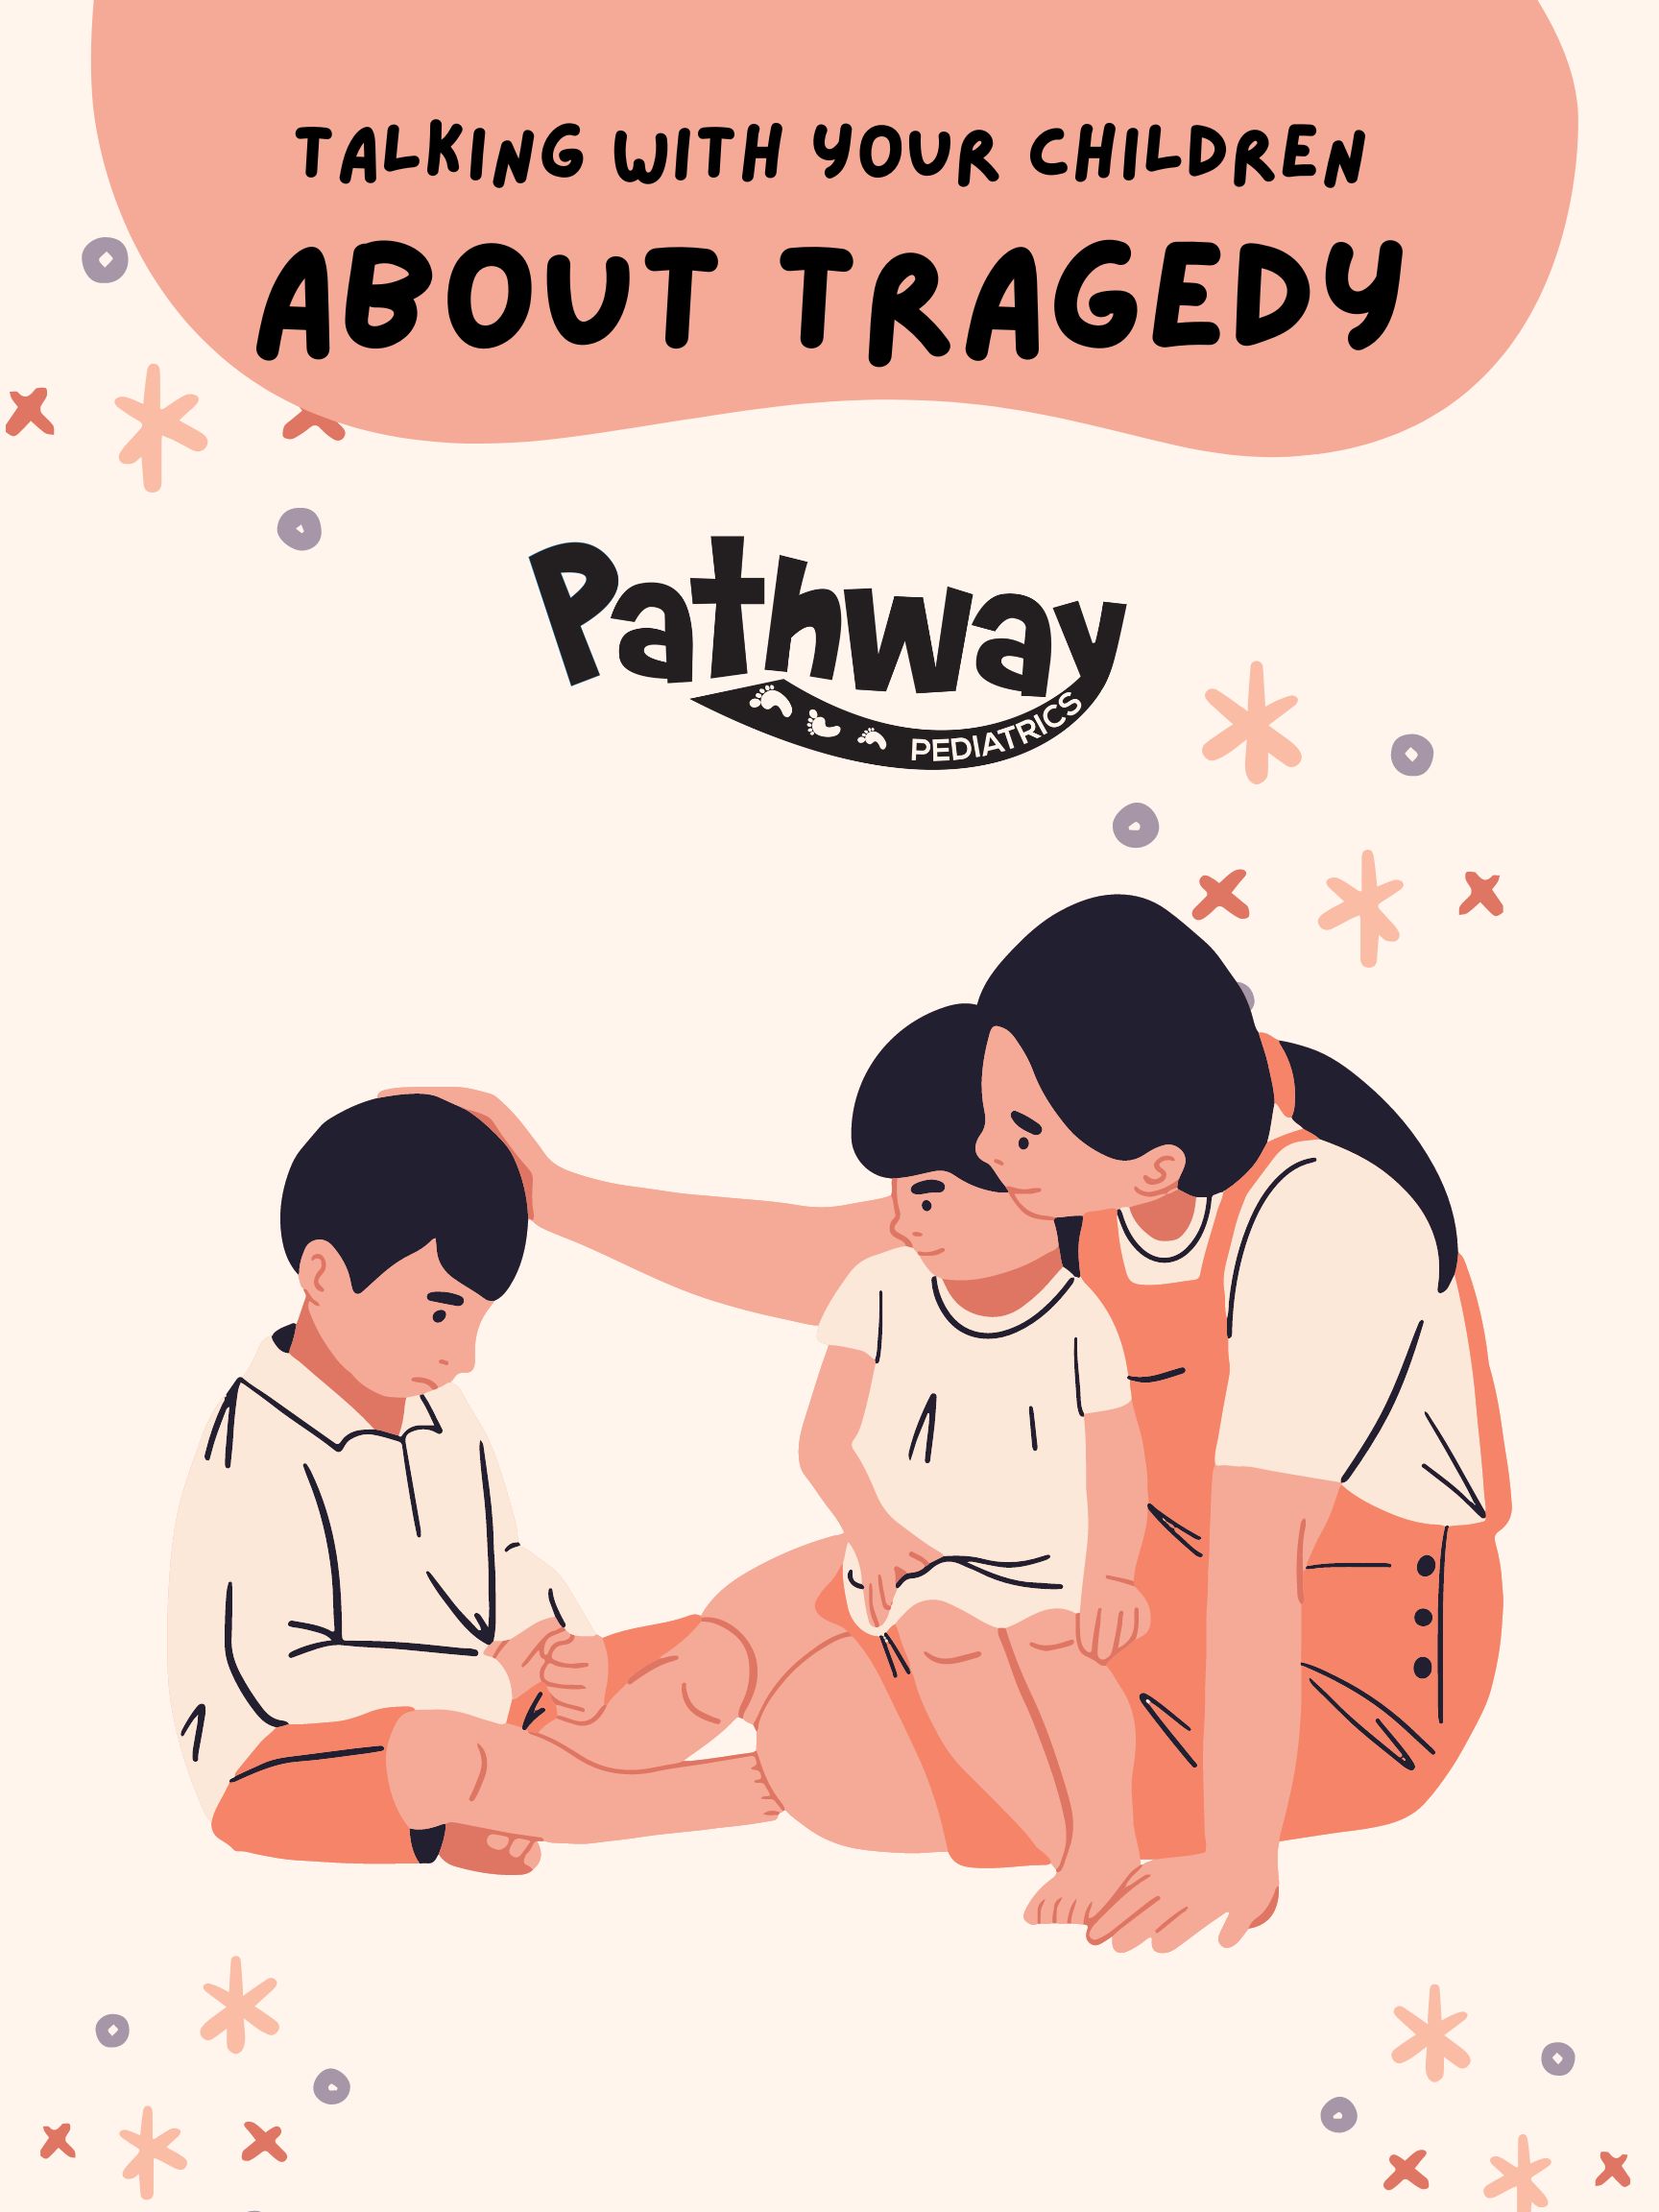 Talking With Children About Tragedies & Other News Events